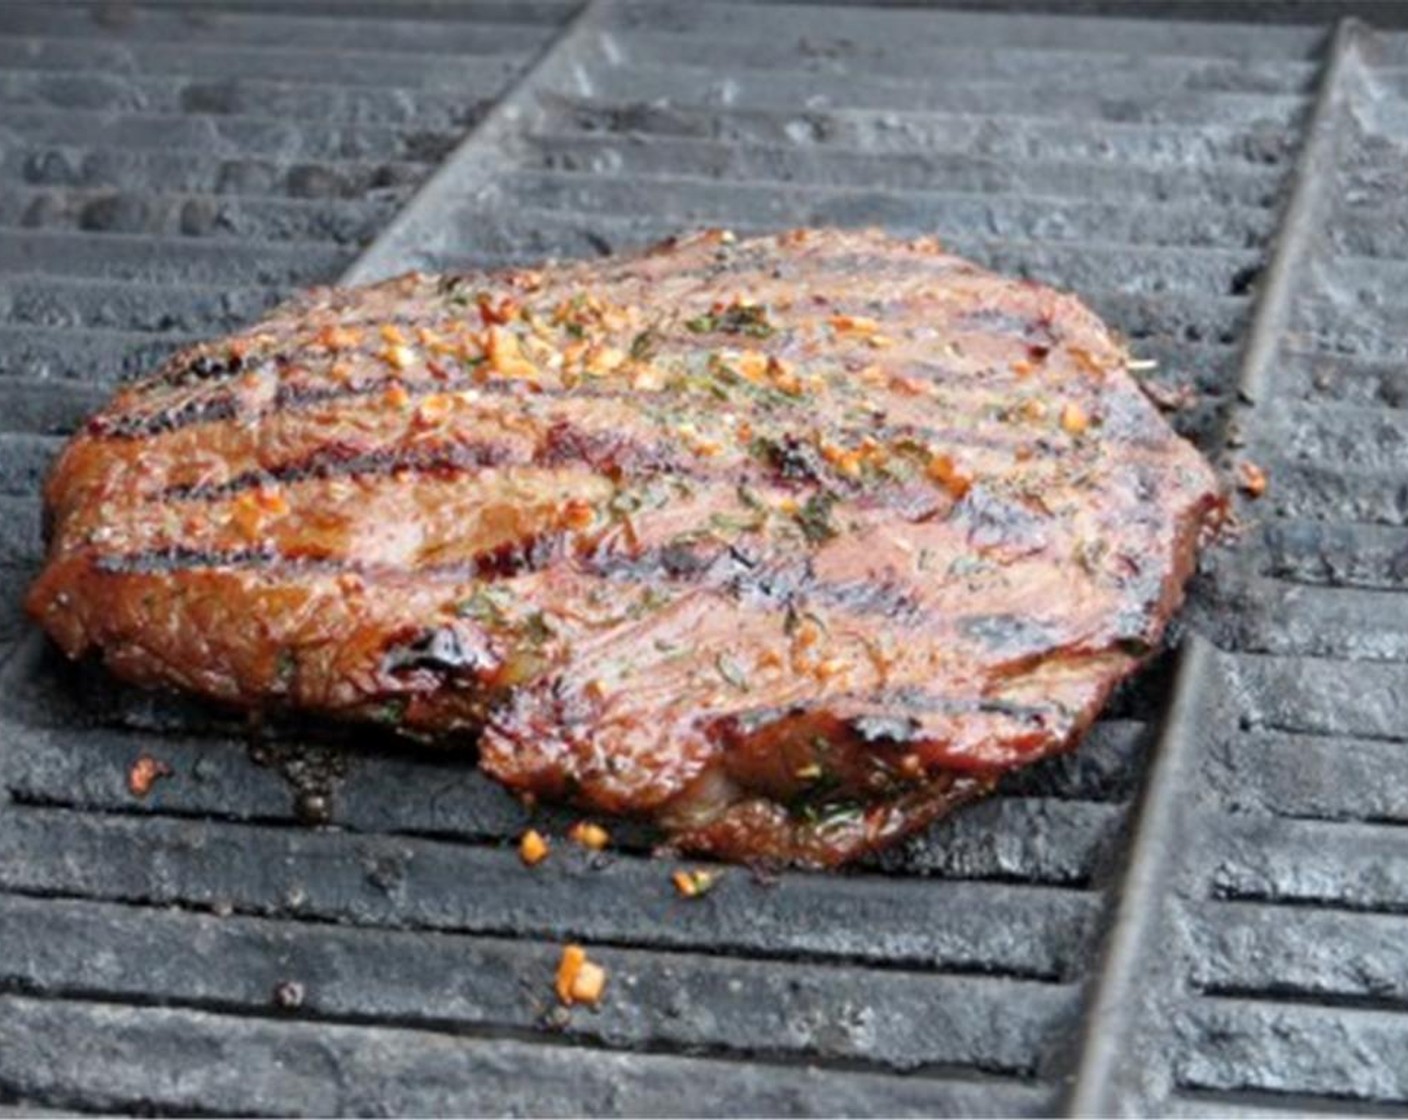 step 5 Heat barbecue or grill to medium high heat. Remove steak from marinade, and blot off the excess moisture with a paper towel. Place steak on the hot grill. Cook for 5-6 minutes on the first side for medium rare. Flip and cook an additional 5-6 minutes.